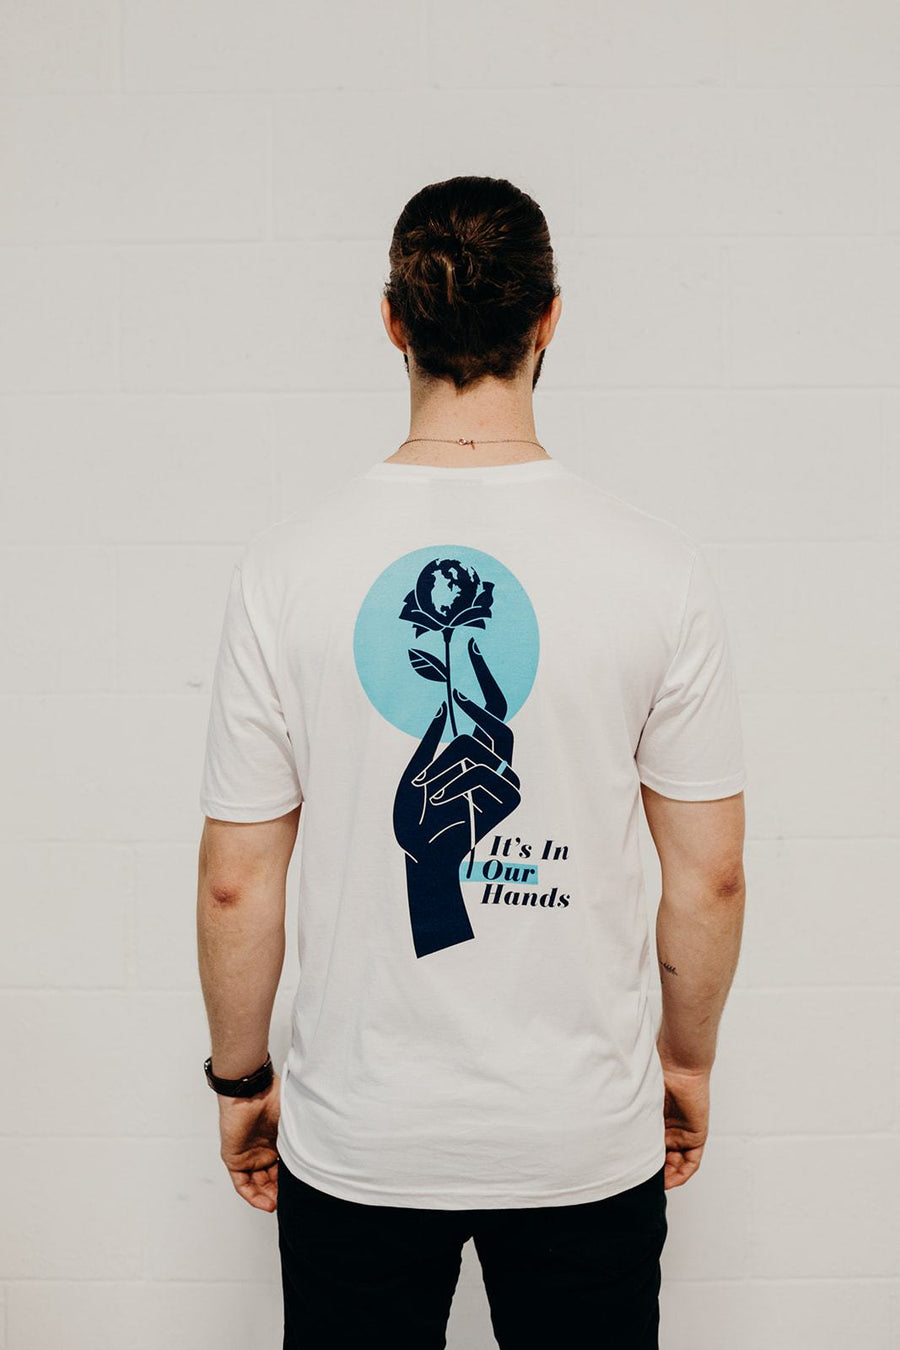 White organic short sleeve unisex t-shirt with blue "it's in our hands" Ungalli logo on front and across back